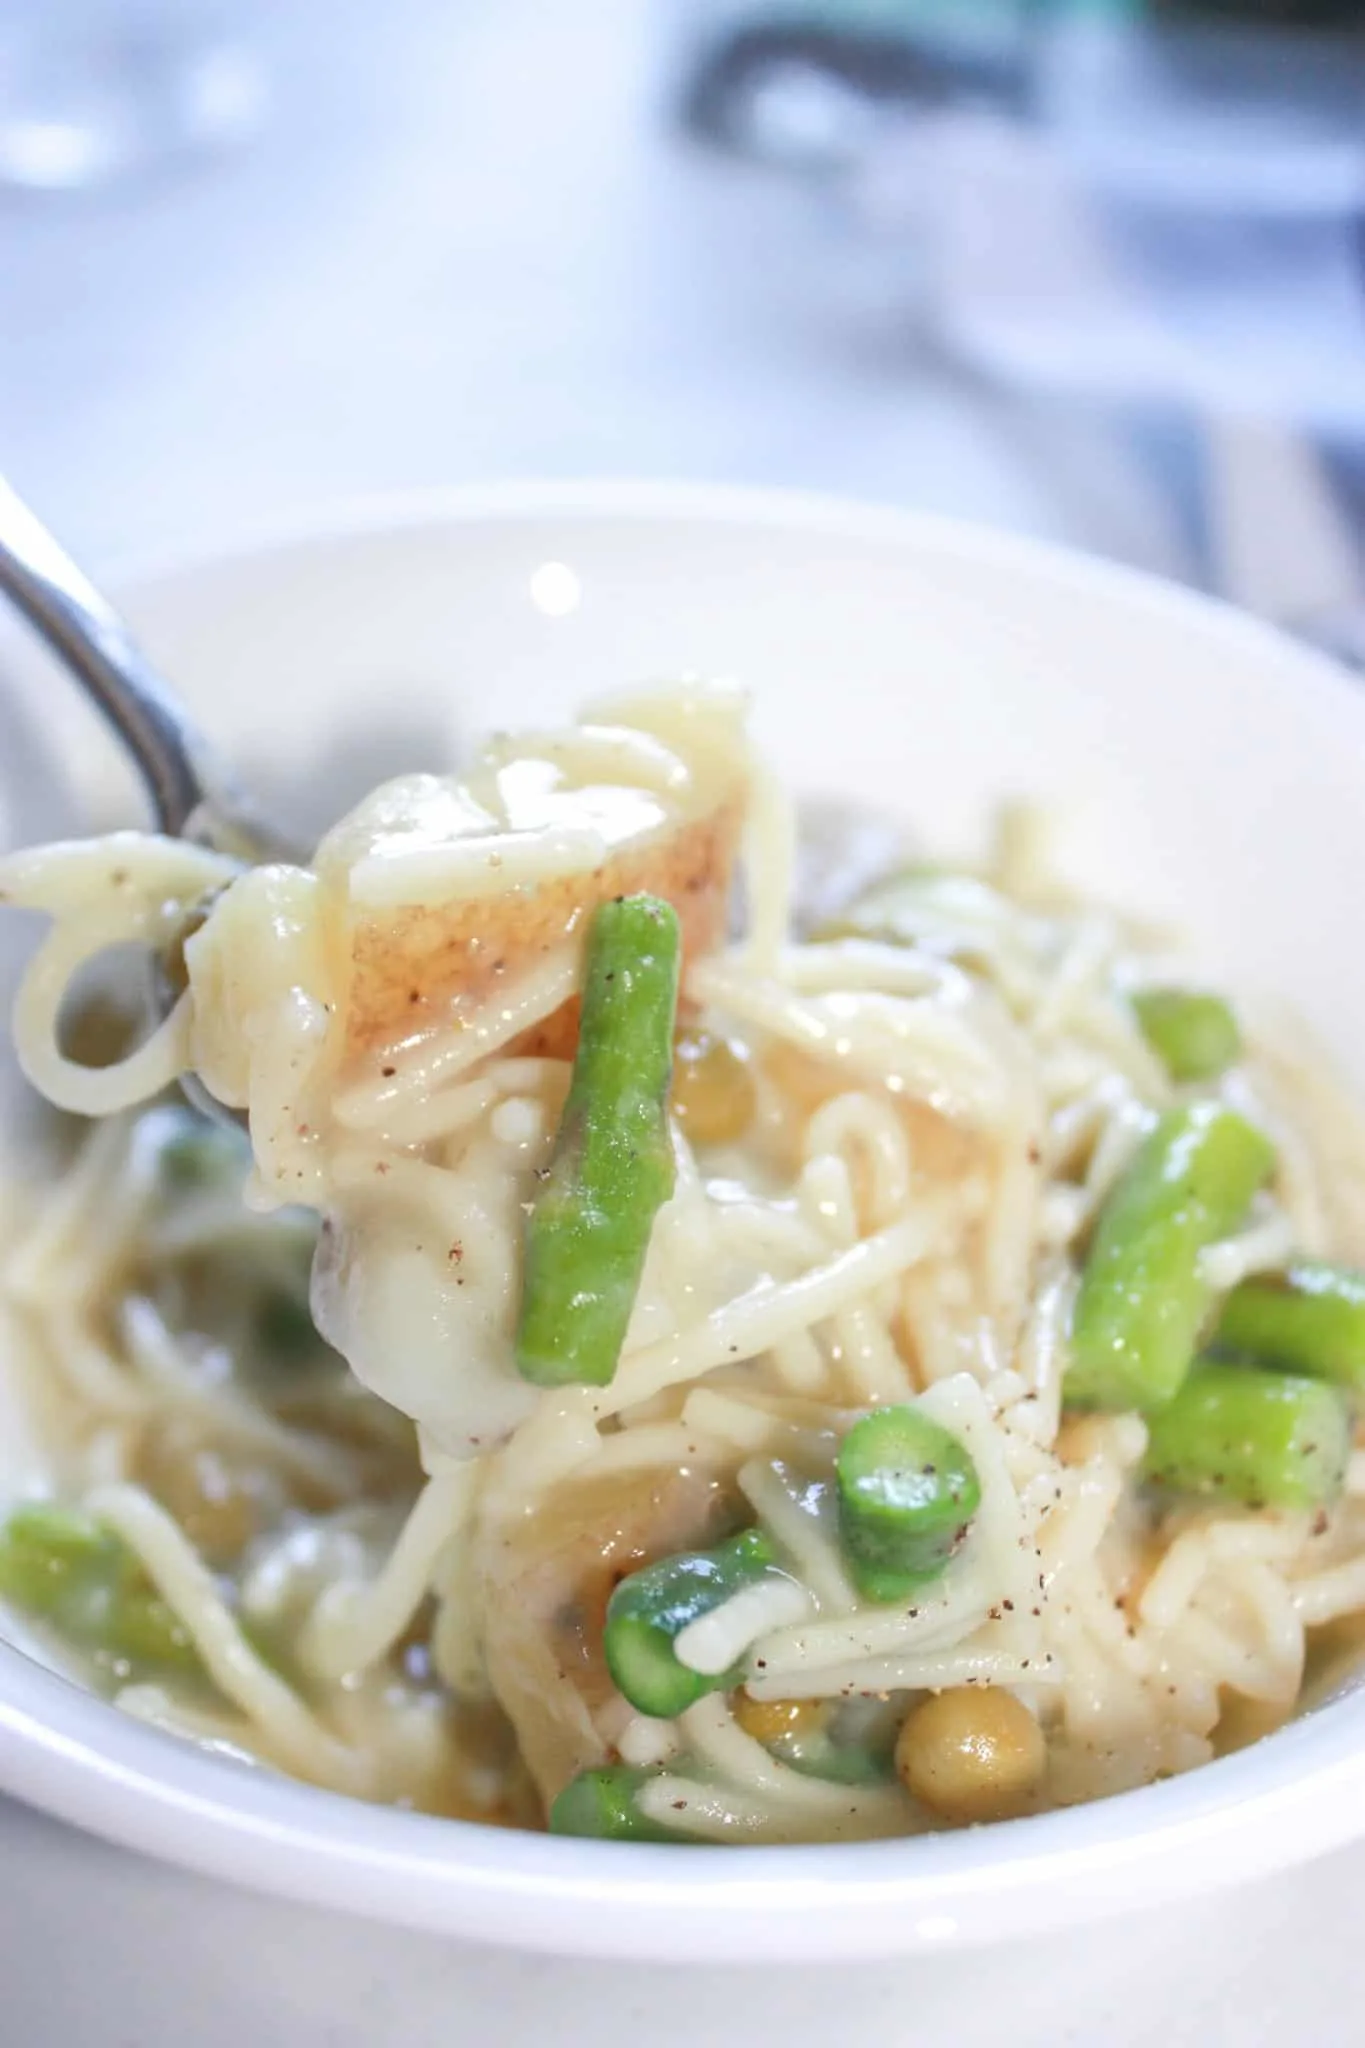 Instant Pot Asparagus and Pasta is a dish I remember my maternal Grandmother making on the stove.  This easy pressure cooker version uses gluten free pasta.  Grandma made this dish with lots of pepper!